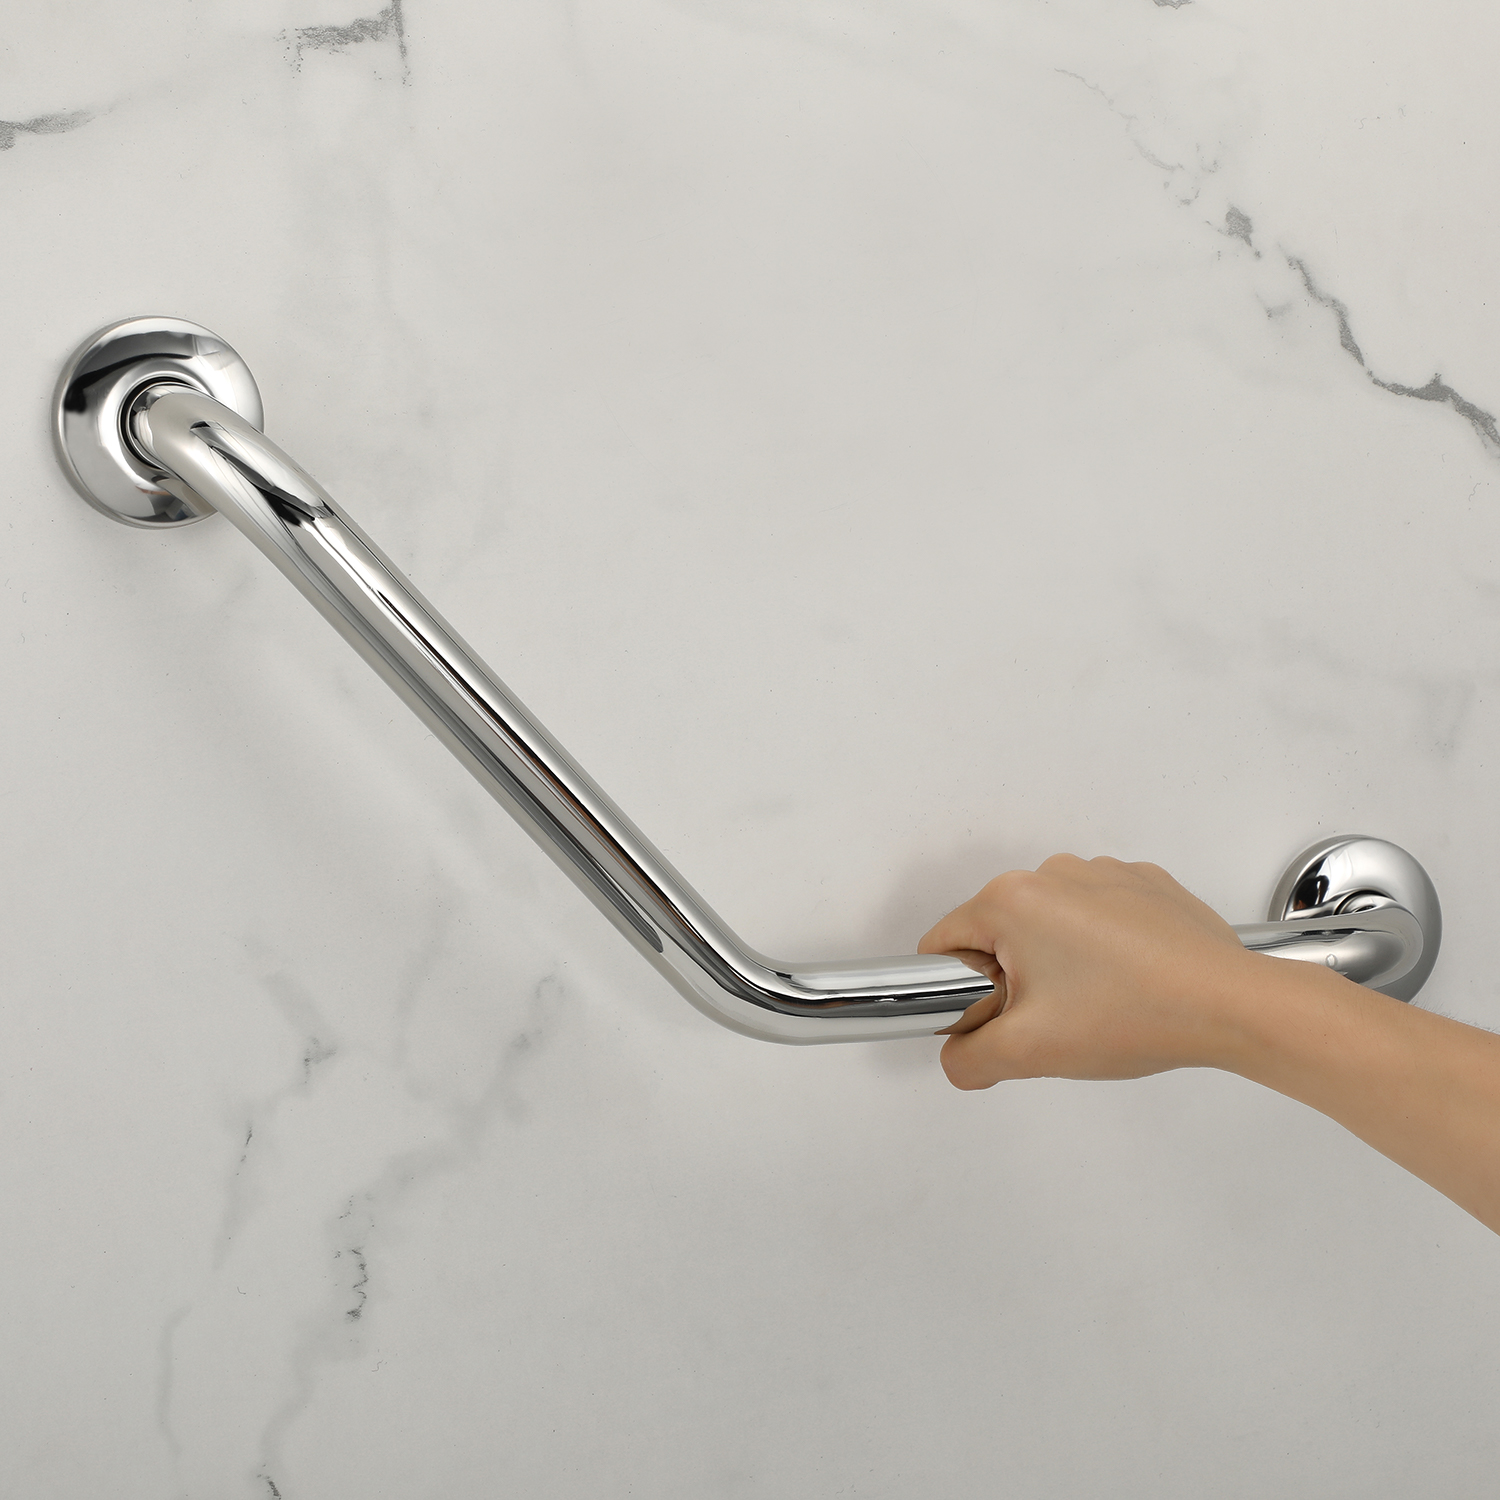 Stainless Steel Toilet Safety Grab Bars